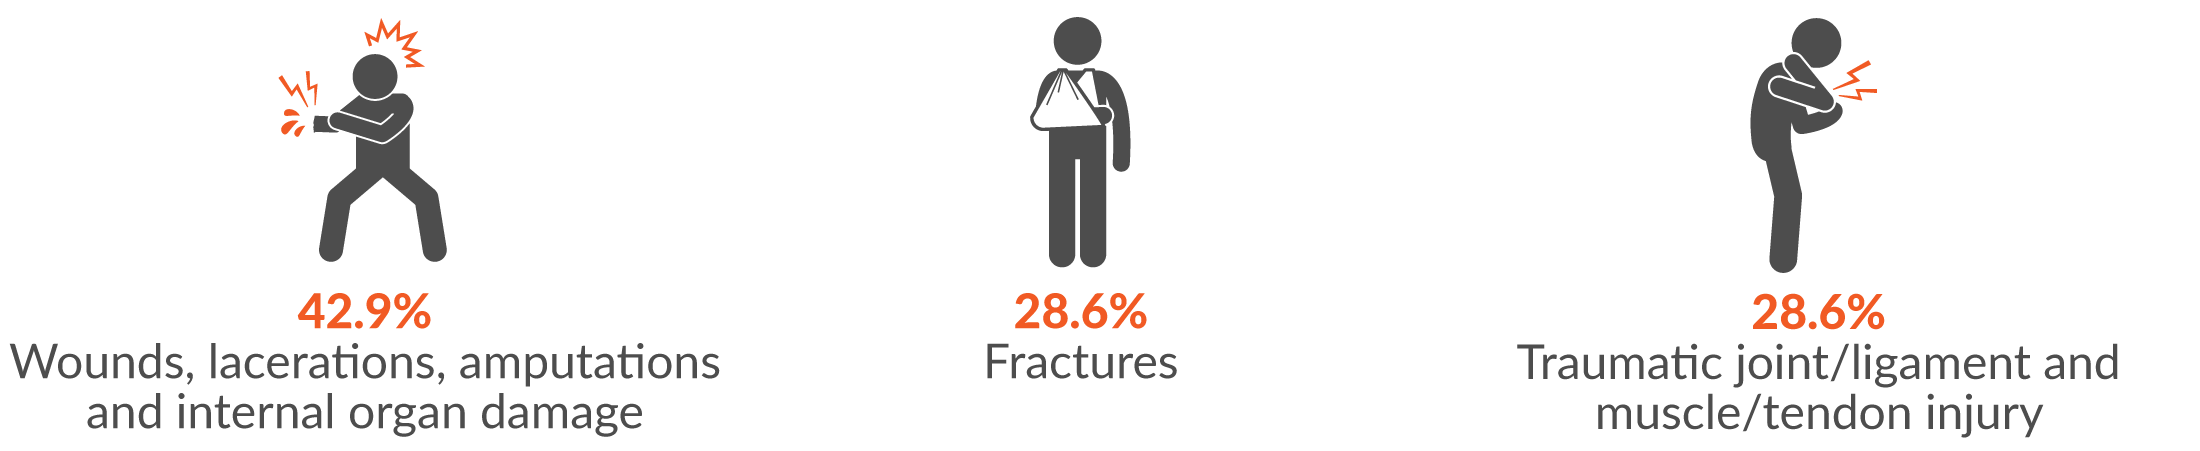 42.9% wounds, lacerations, amputations and internal organ damage; 28.6% fractures; and 28.6% traumatic joint/ligament and muscle/tendon injury.